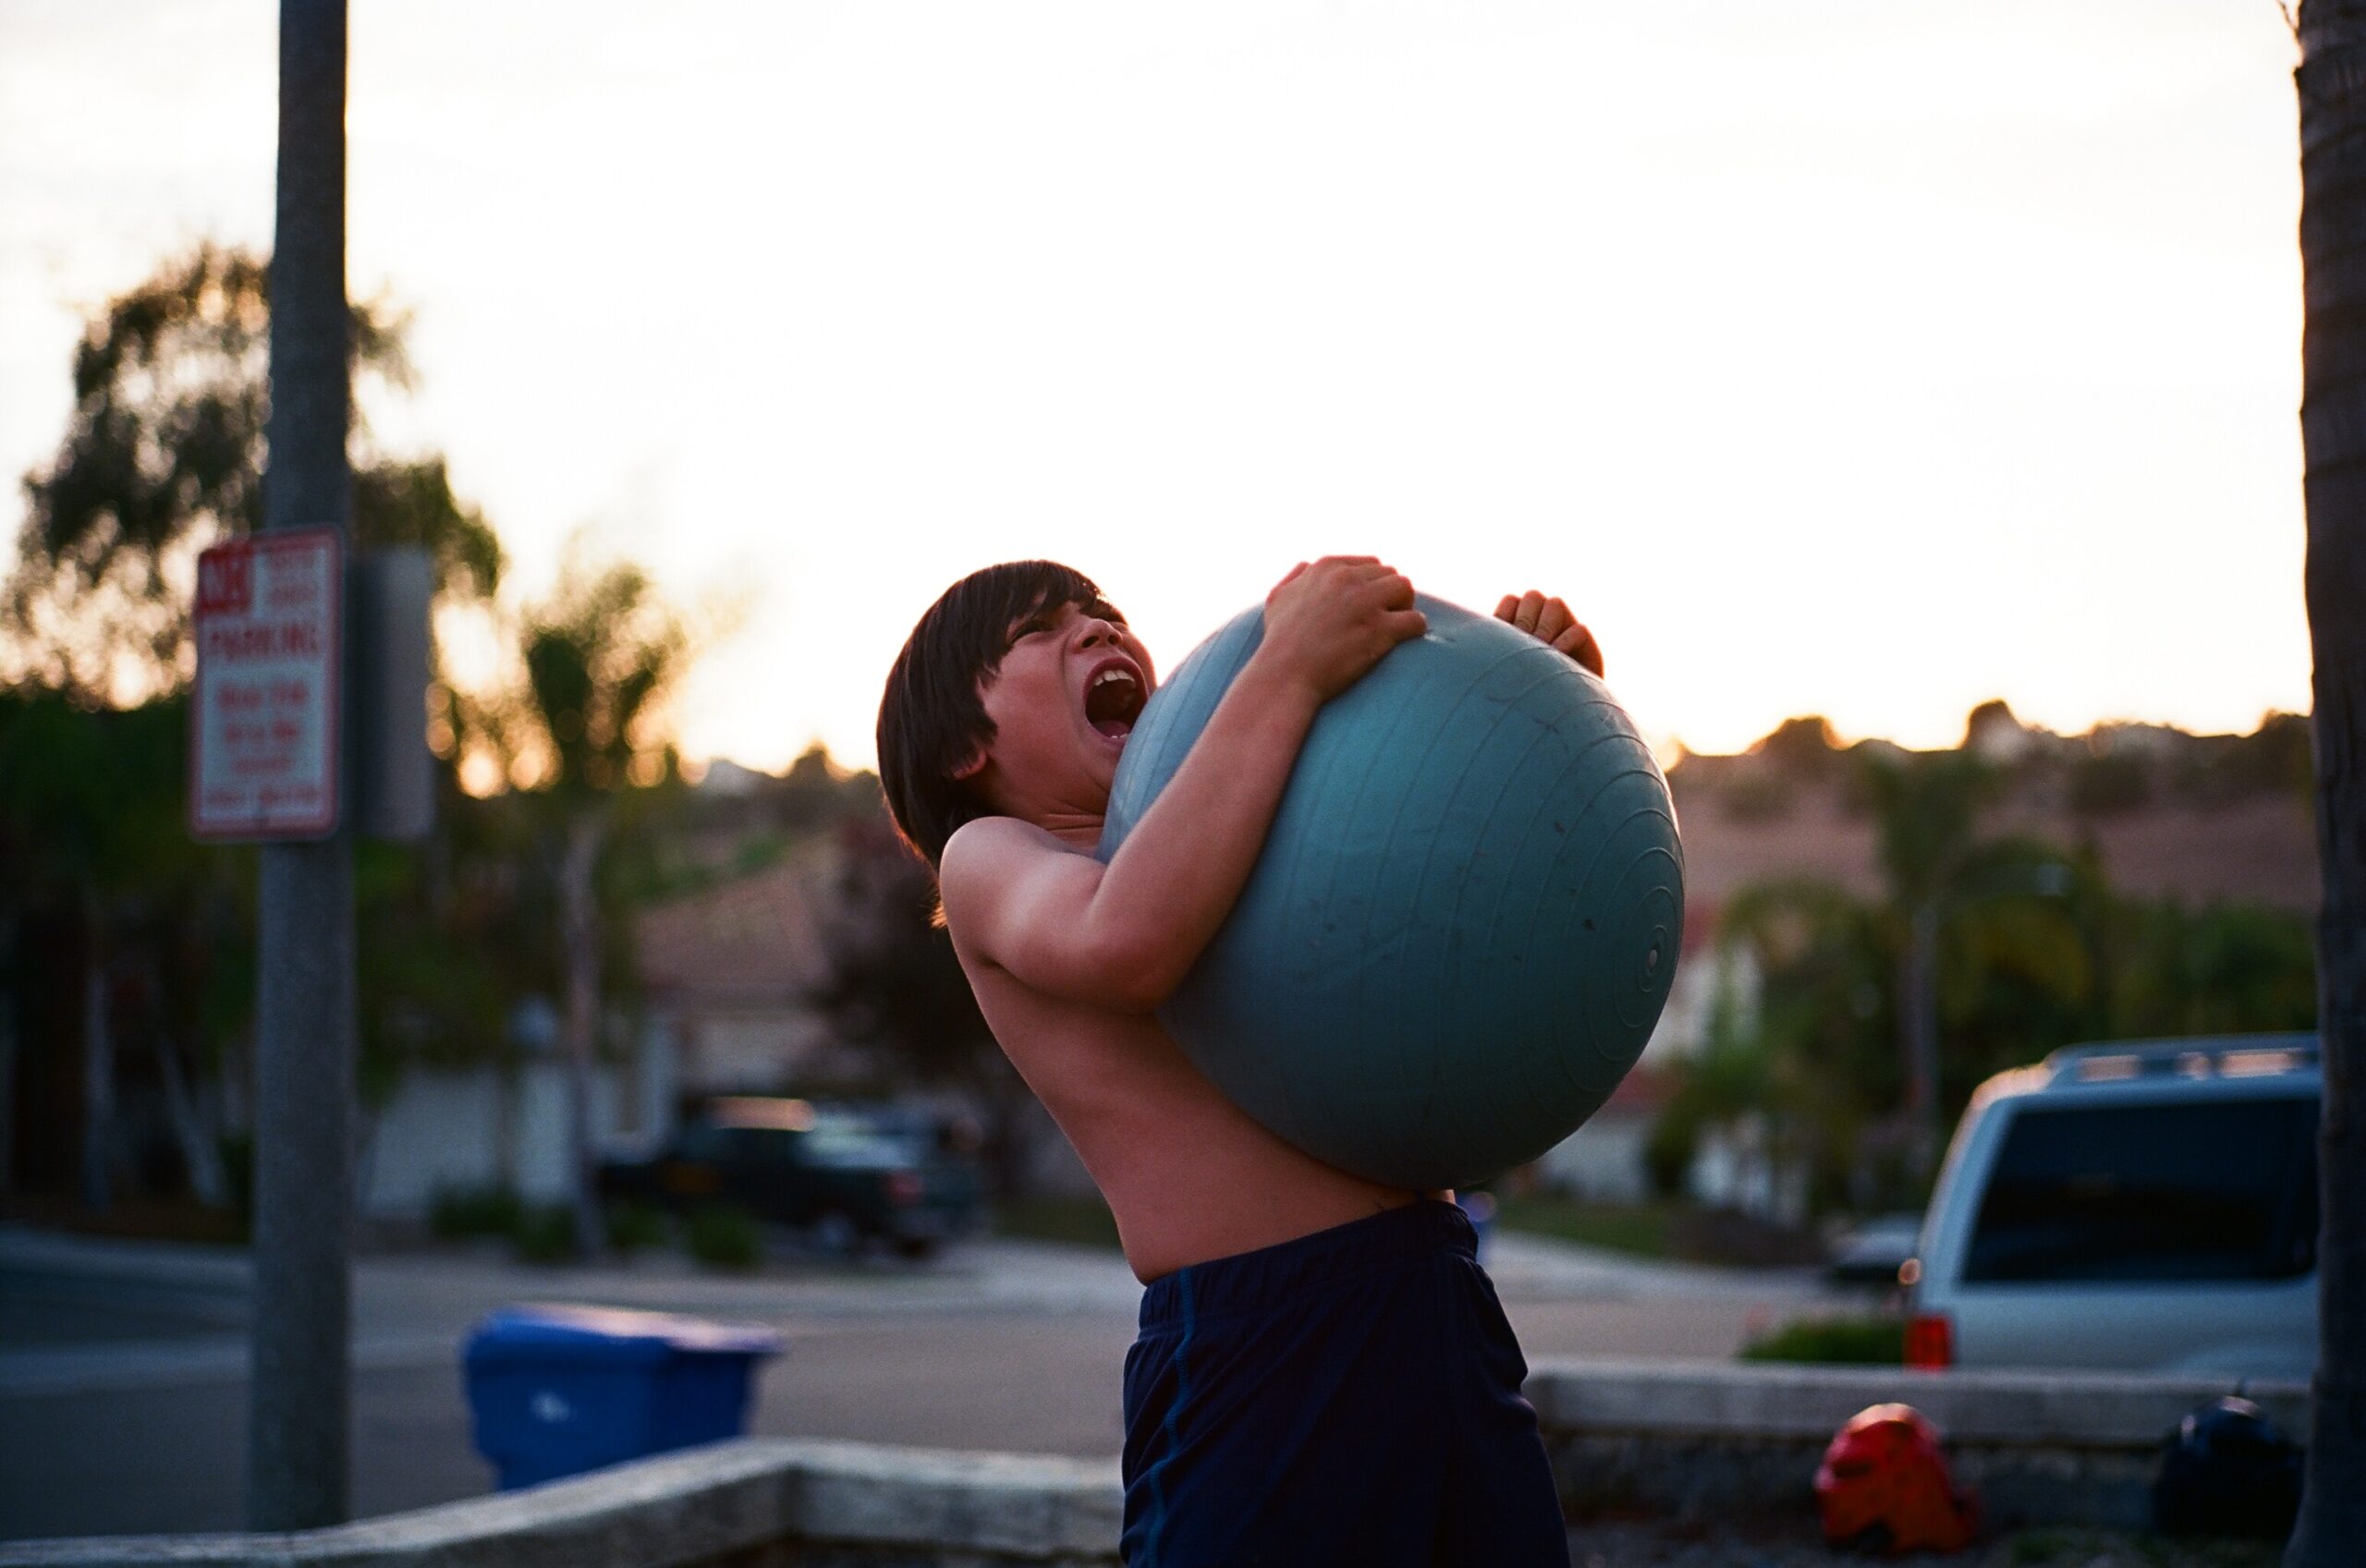 Boy screams while clutching a large ball. Behavioral problems are sometimes a sign of bad parenting.